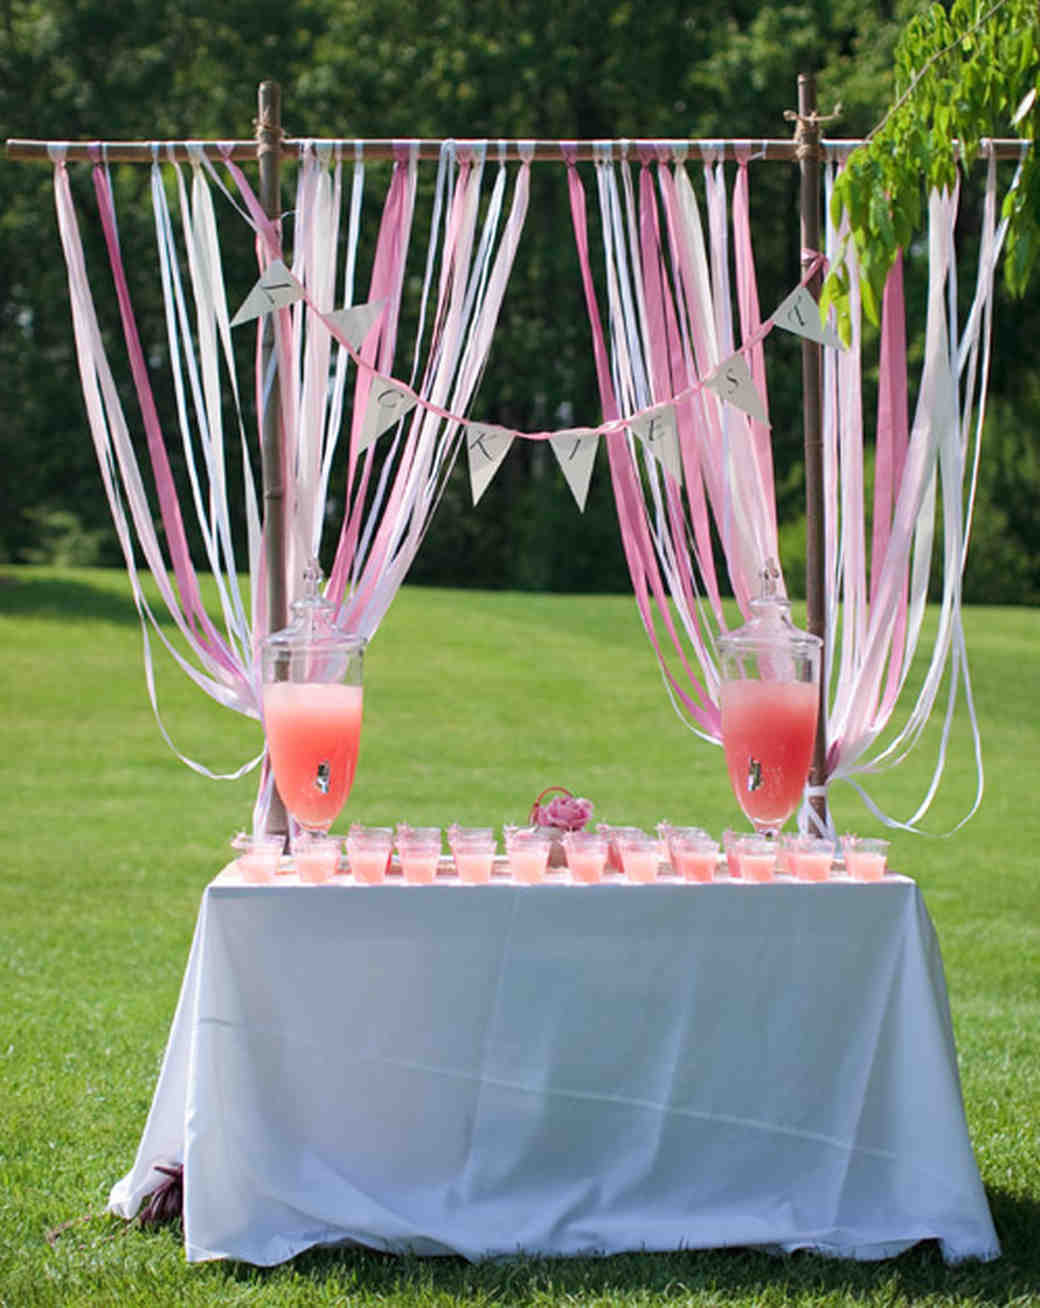 Low Key Engagement Party Ideas
 25 Casual Wedding Ideas for Your Low Key Big Day